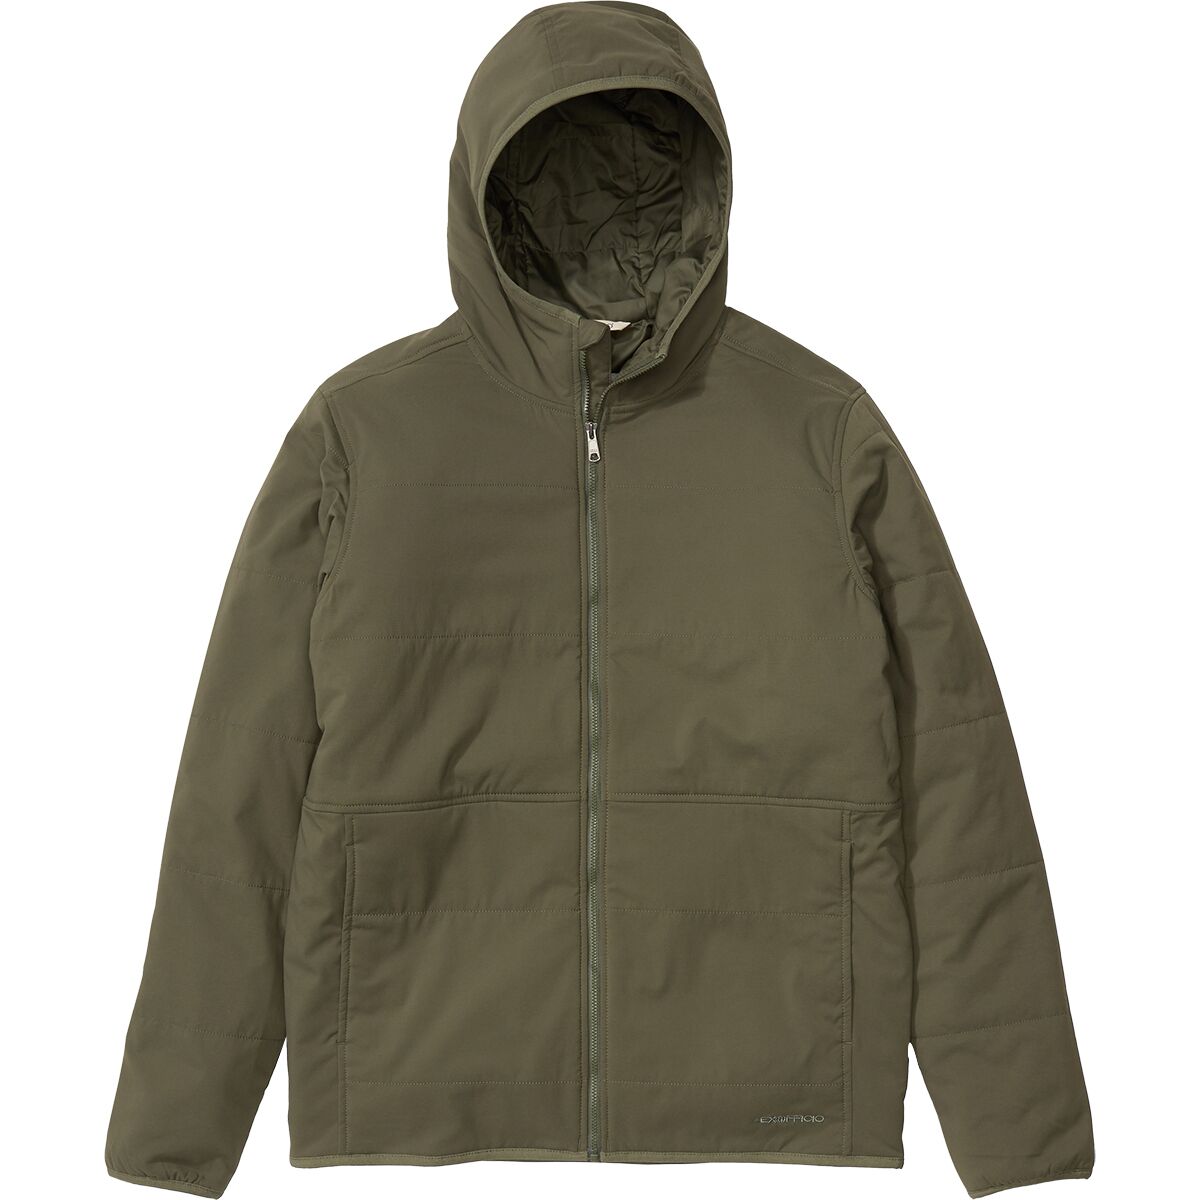 Pargo Insulated Hooded Jacket - Men